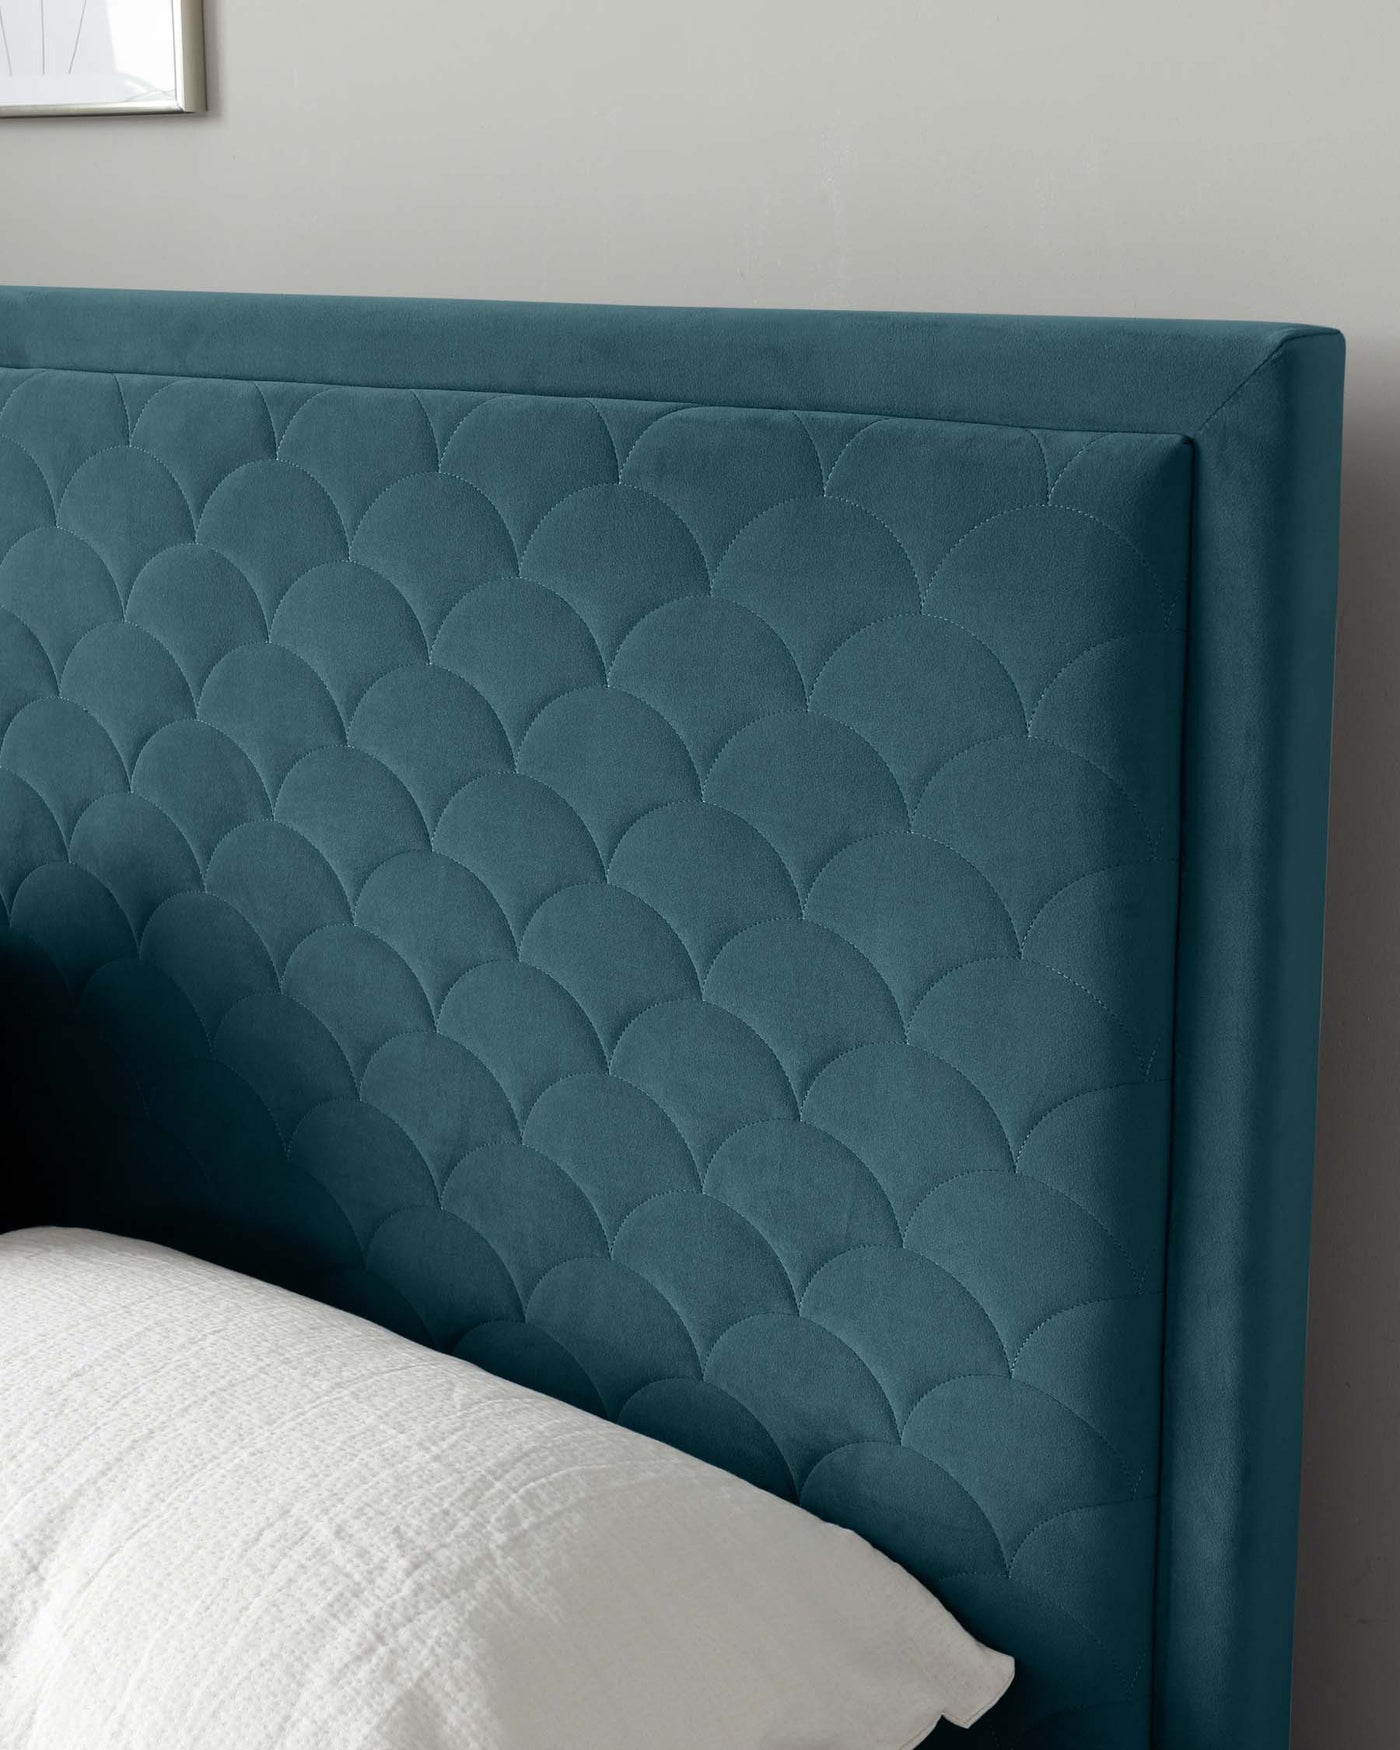 Elegant teal upholstered headboard with scalloped tufting detail, accompanied by crisp white bedding.